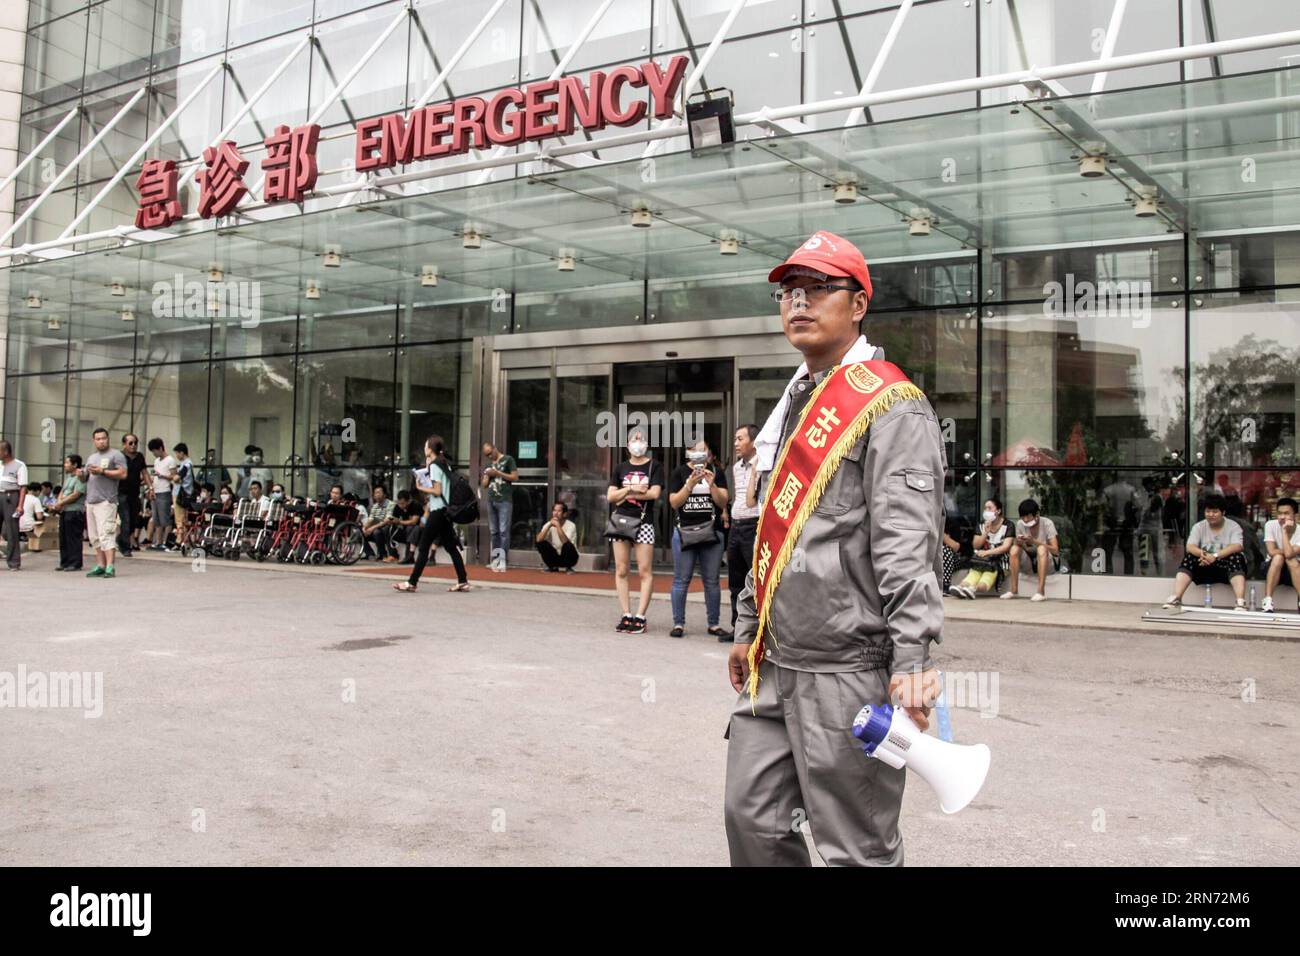 (150814) -- TIANJIN, Aug. 14, 2015 -- A volunteer is seen at Taida Hospital near the warehouse explosion site in Tianjin, north China, Aug. 14, 2015. The death toll has risen to 56, including 21 firemen, from massive warehouse explosions that hit Tianjin Wednesday night, local authorities said Friday. Meanwhile, 721 others were hospitalized, including 25 critically wounded and 33 in serious condition. Firefighters have mostly extinguished the flames at the site. )(mcg) CHINA-TIANJIN-EXPLOSION-VOLUNTEER (CN) ZhengxHuansong PUBLICATIONxNOTxINxCHN   150814 Tianjin Aug 14 2015 a Volunteer IS Lakes Stock Photo